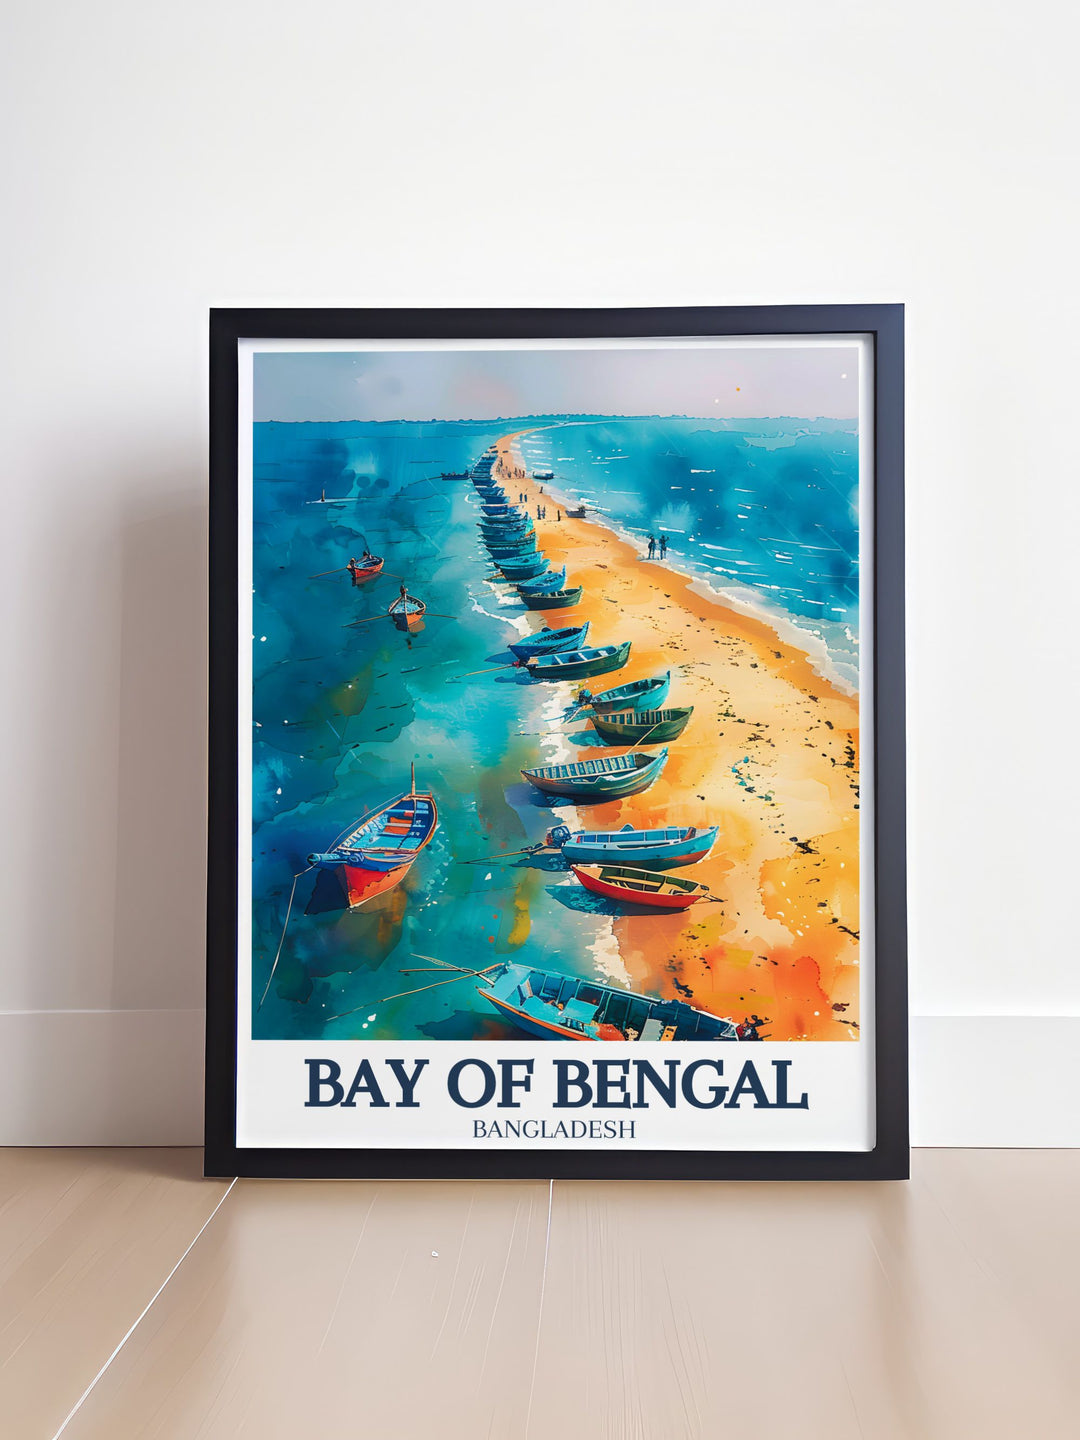 Stunning Buriganga river Dhaka Bay of Bengal wall art featuring detailed street maps and fine line prints capturing the essence of Bangladesh ideal for home decor and gifts for any occasion